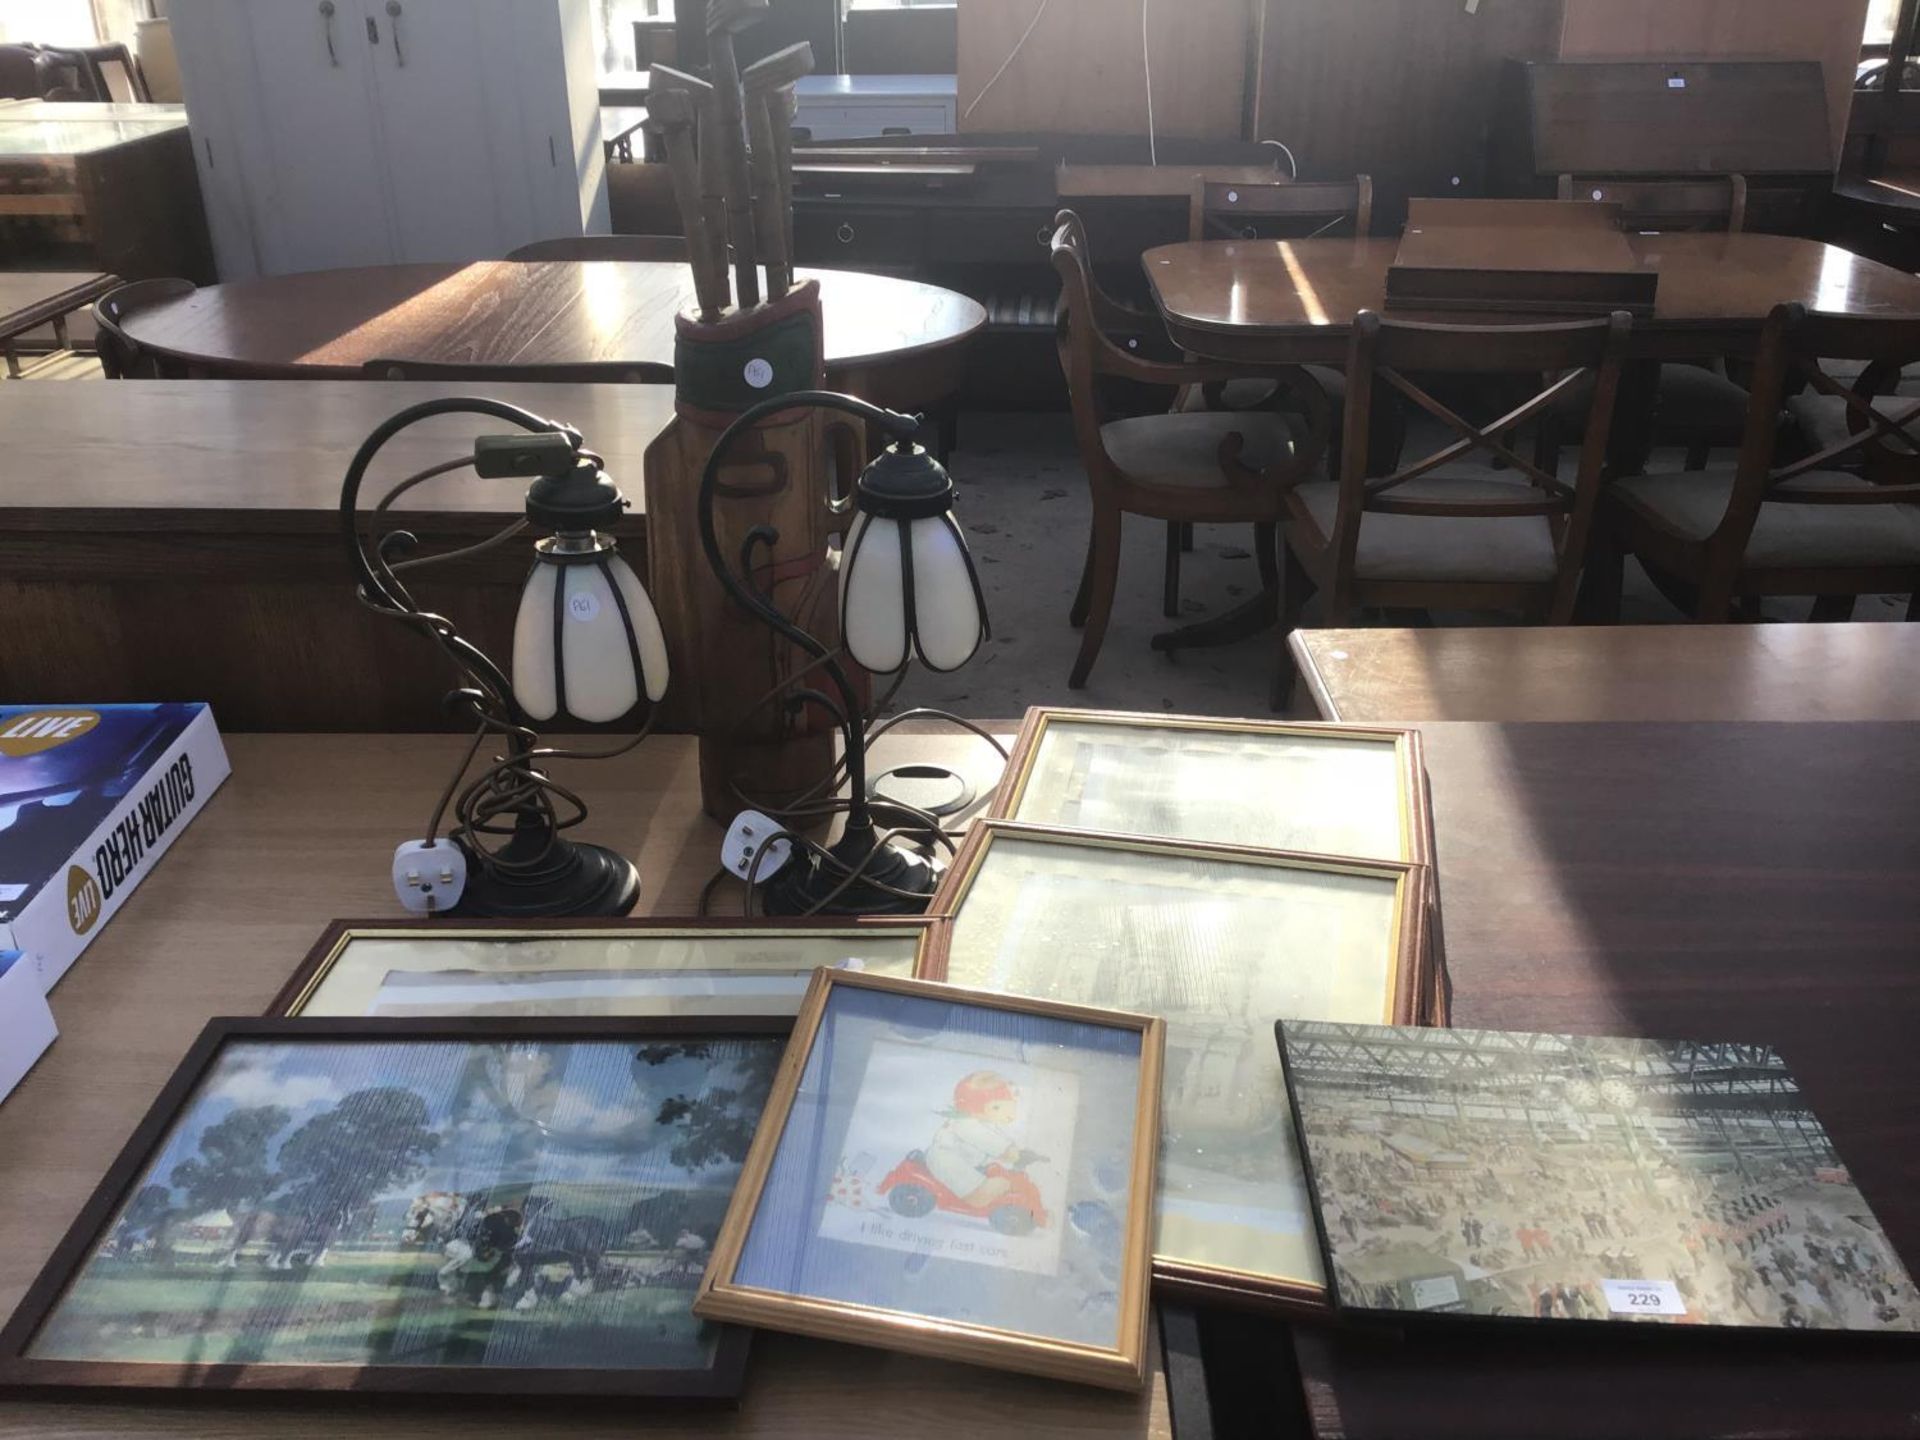 A PAIR OF TIFFANY STYLE TABLE LAMPS, A WOODEN GOLF BAG AND CLUBS AND VARIOUS PICTURES